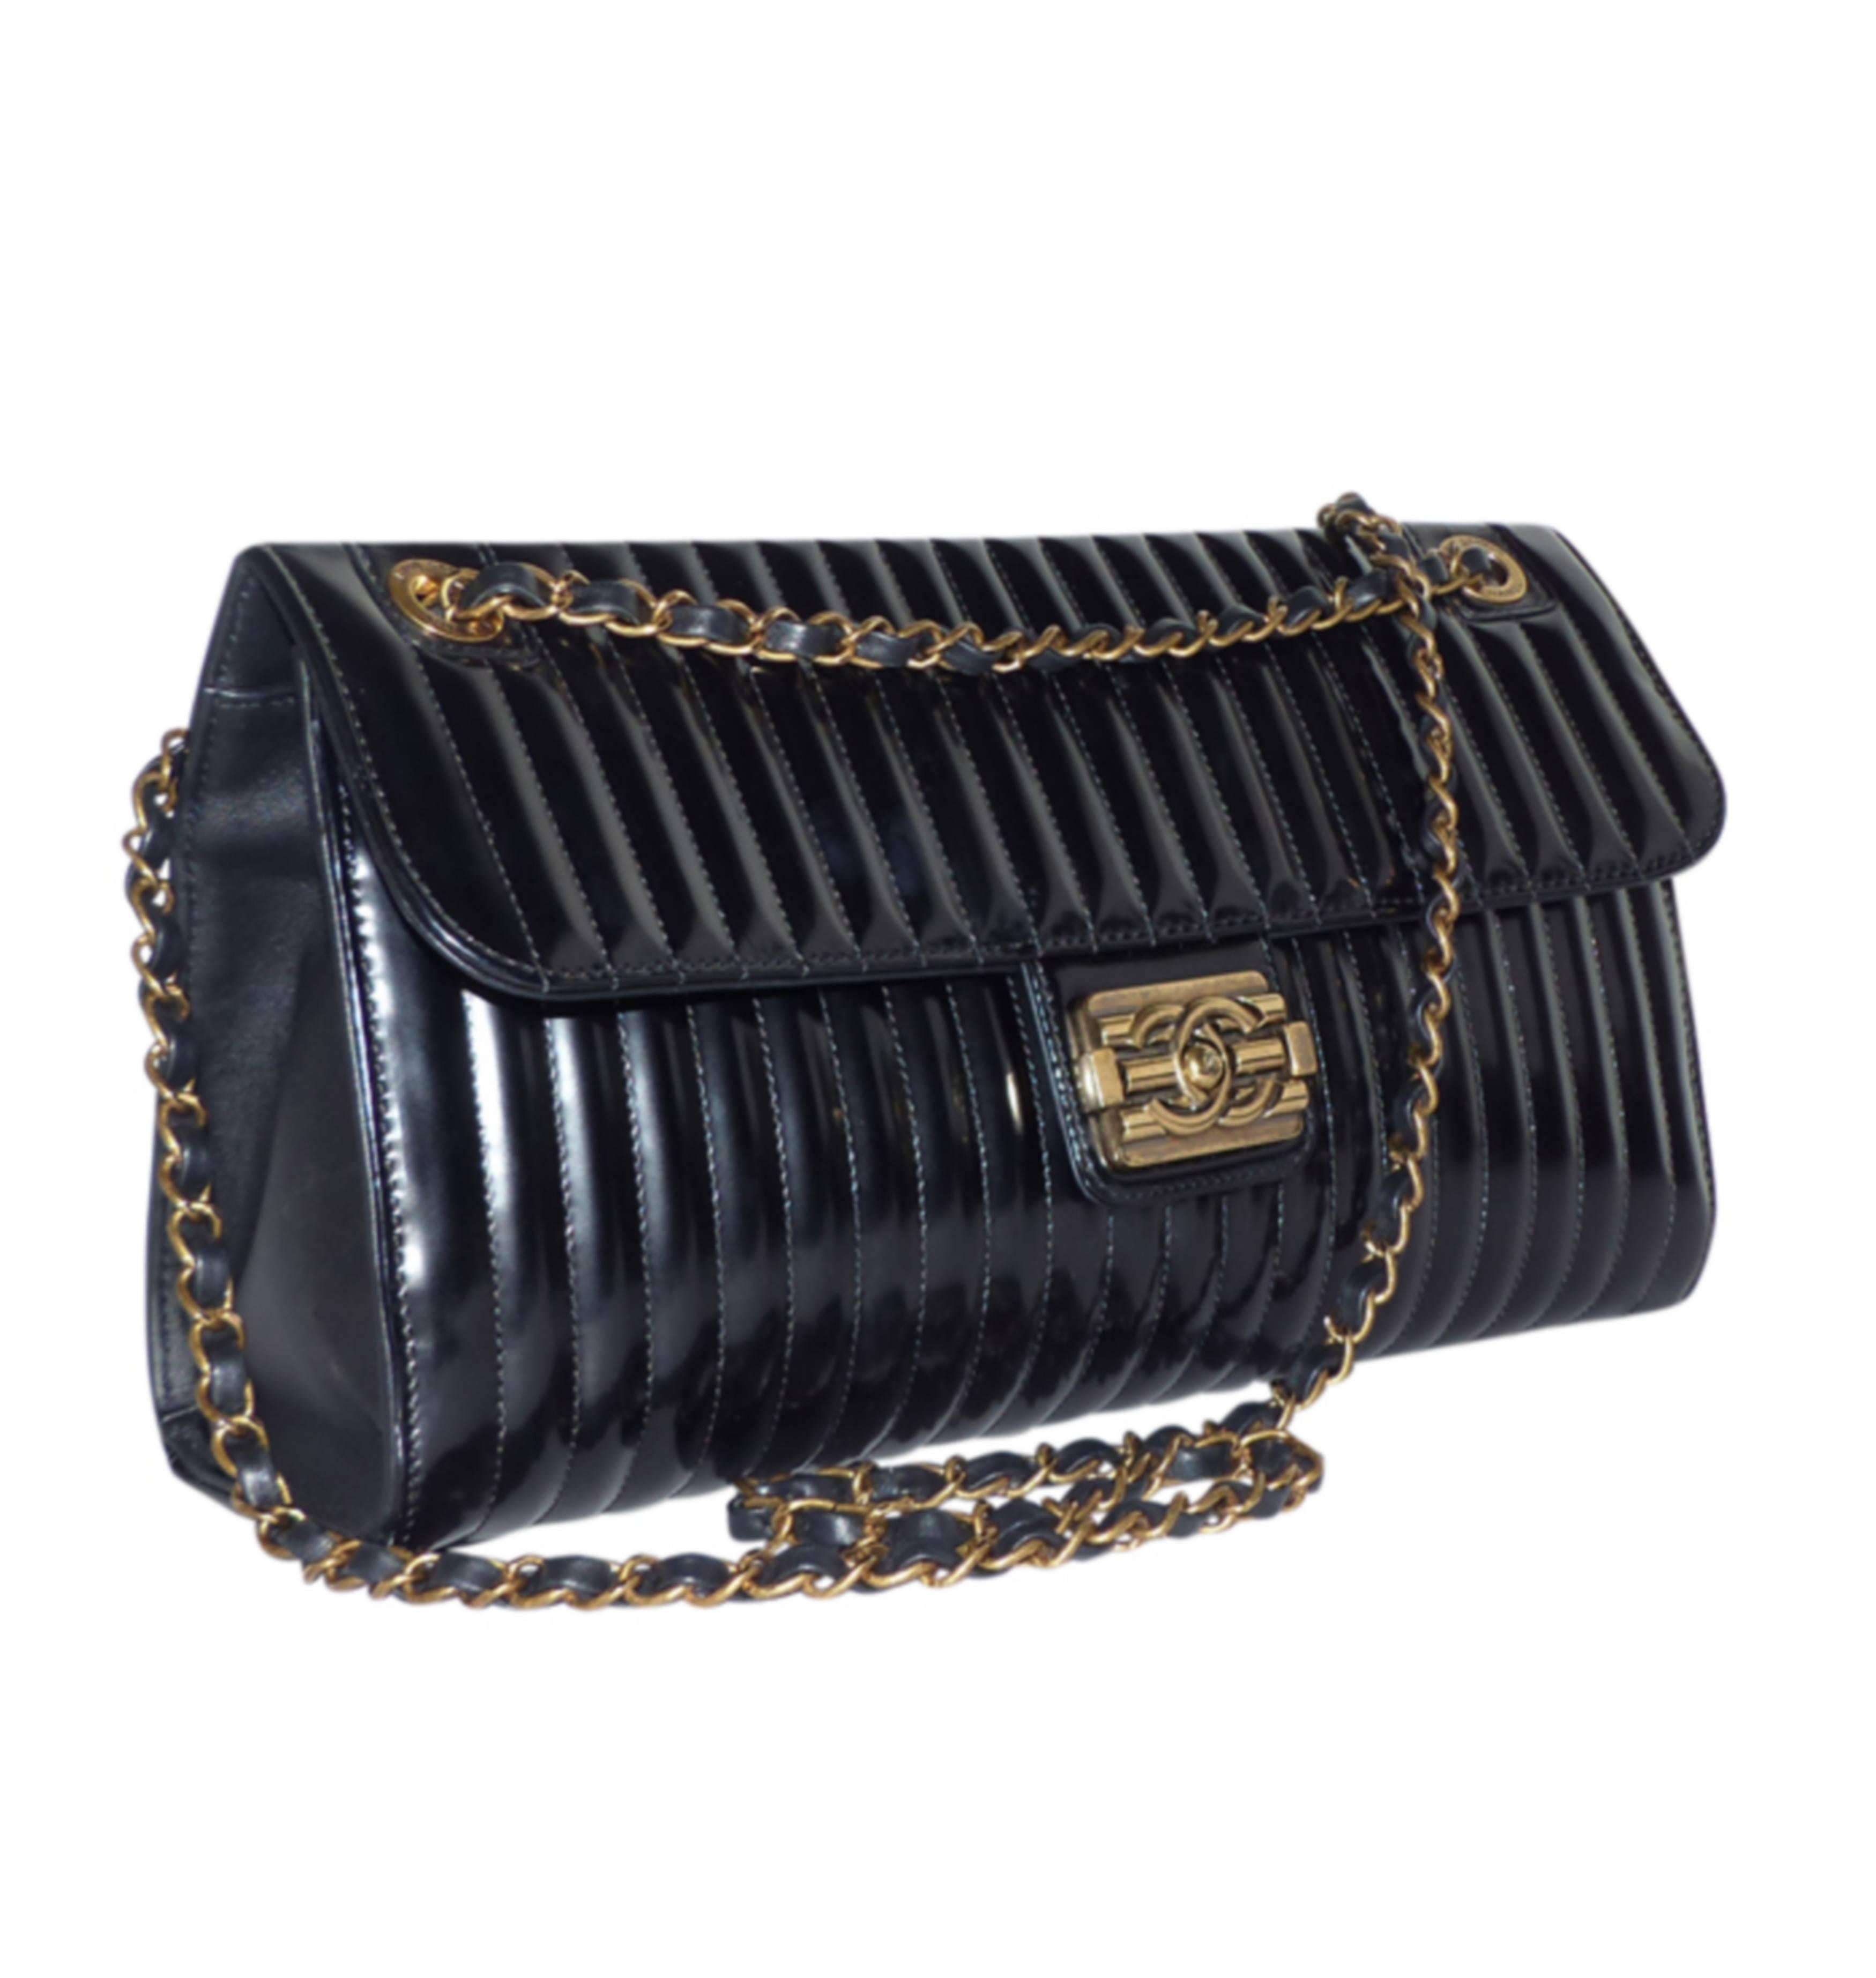 Collector Edition Limited
Gorgeous black glossy leather handbag from the Paris-Venice collection.
Large rectangular shape.
Gilded metal handles, to be worn double or single on the shoulder.
Flap closure and double C clasp
1 zipped pocket.
Beige